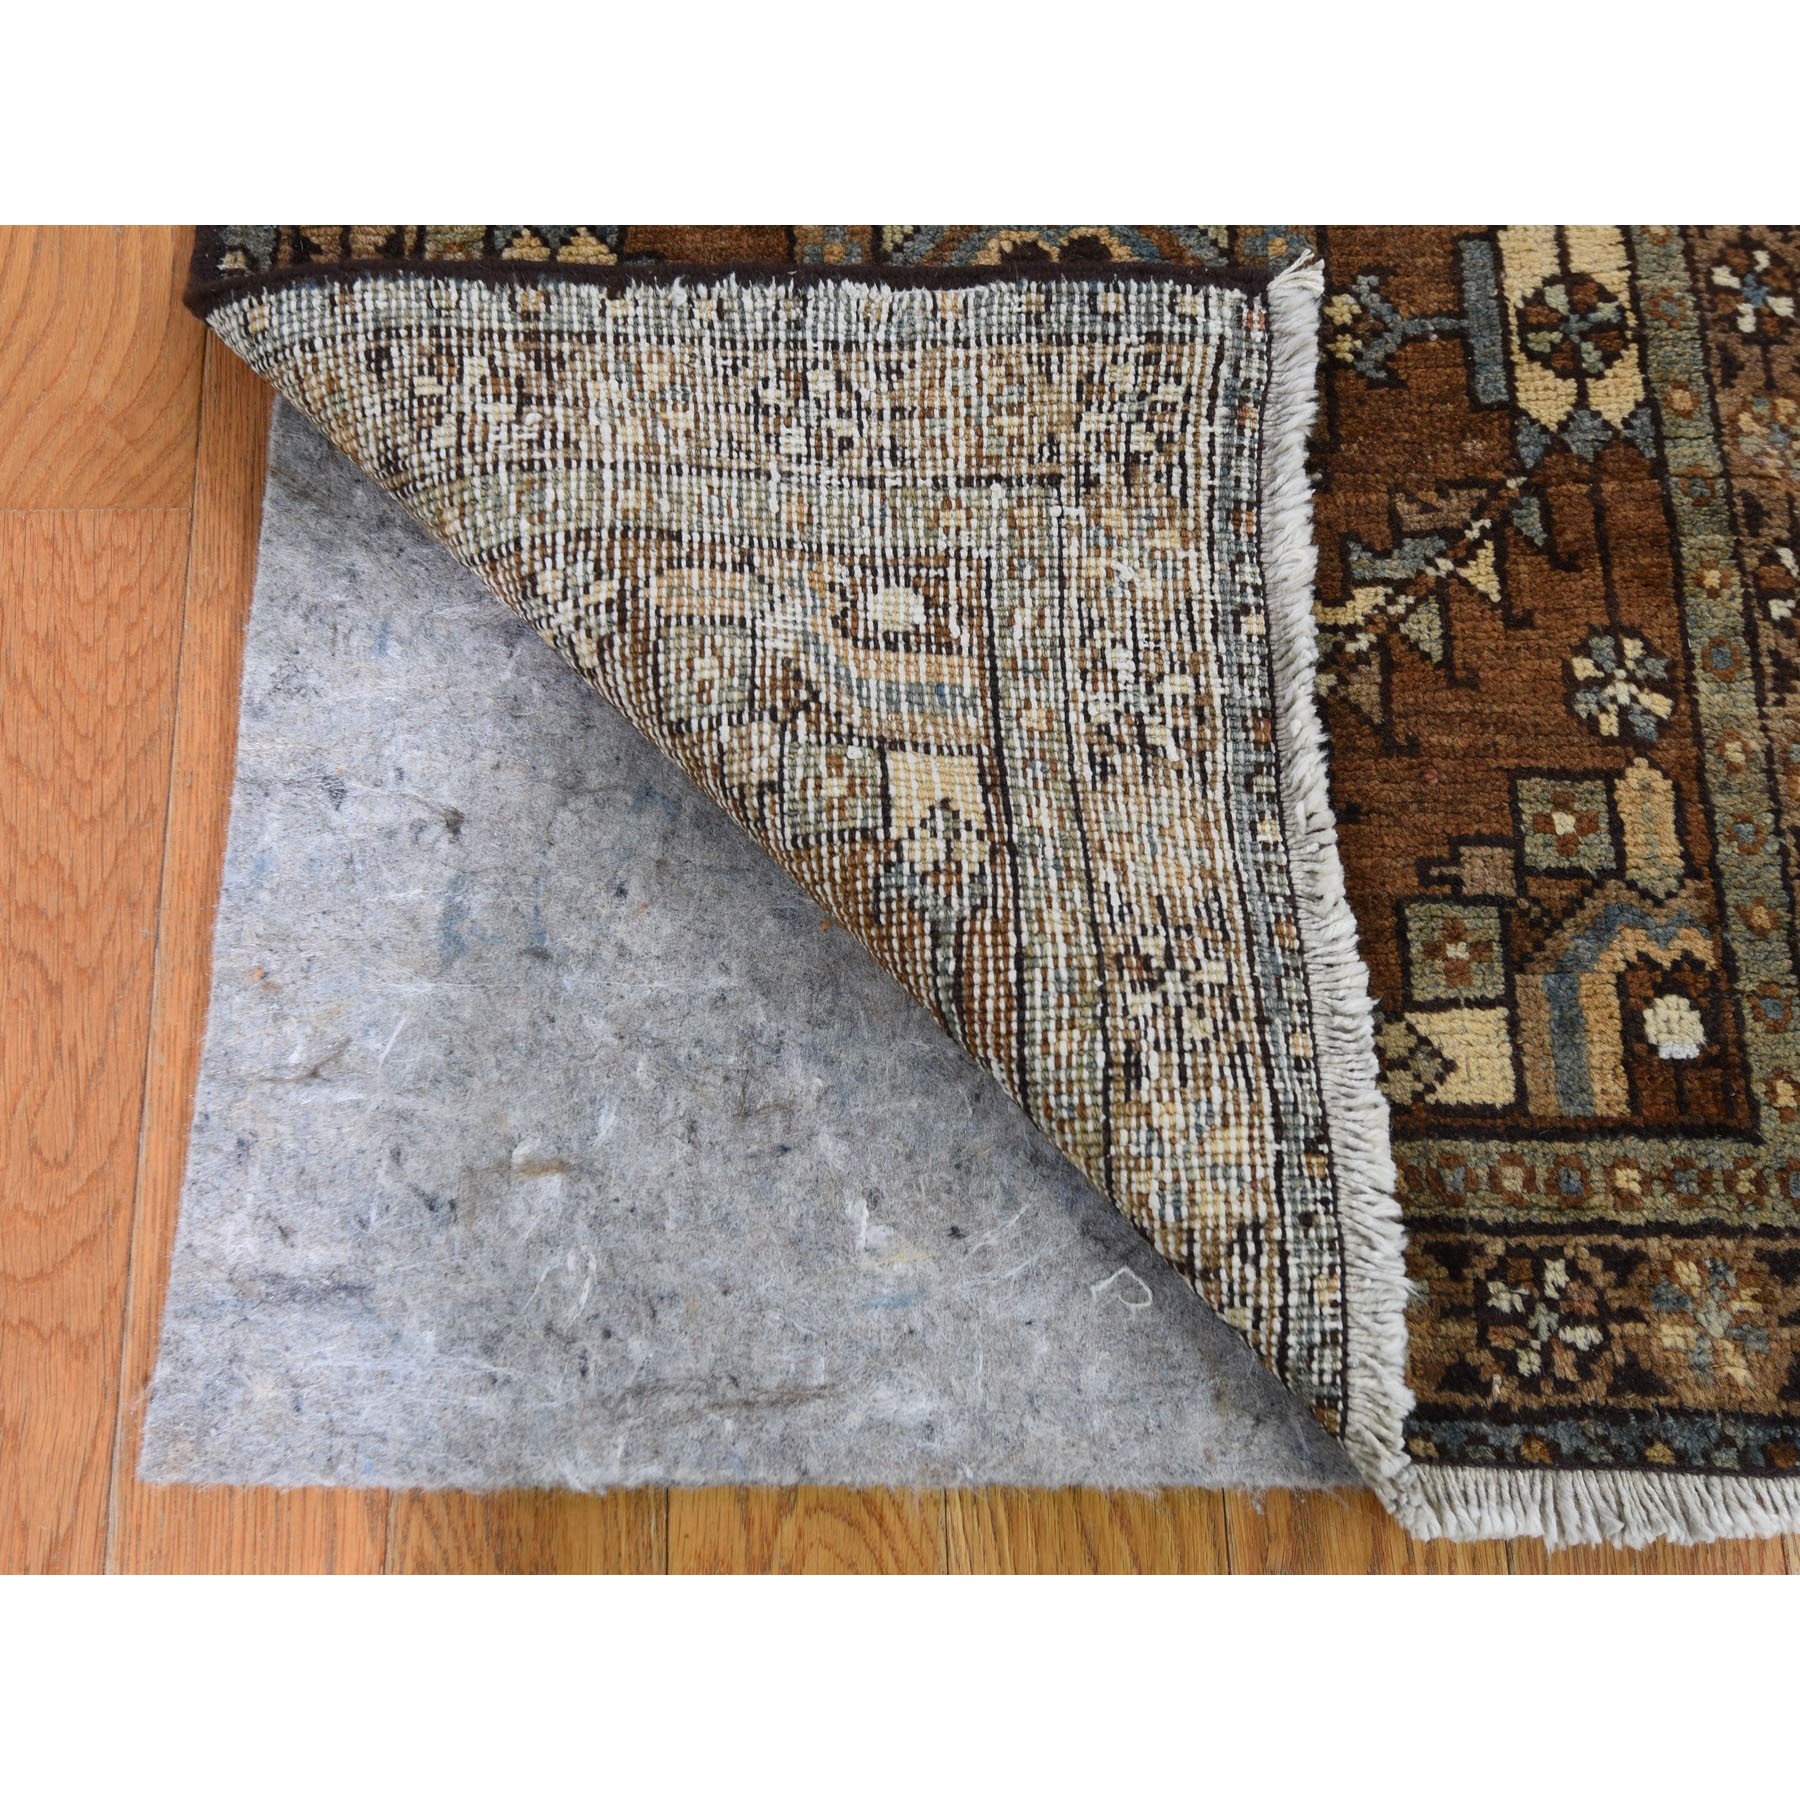 2-x9-1  Brown Antique Persian Heriz With Soft Natural Colors Narrow Runner Hand Knotted Oriental Rug 